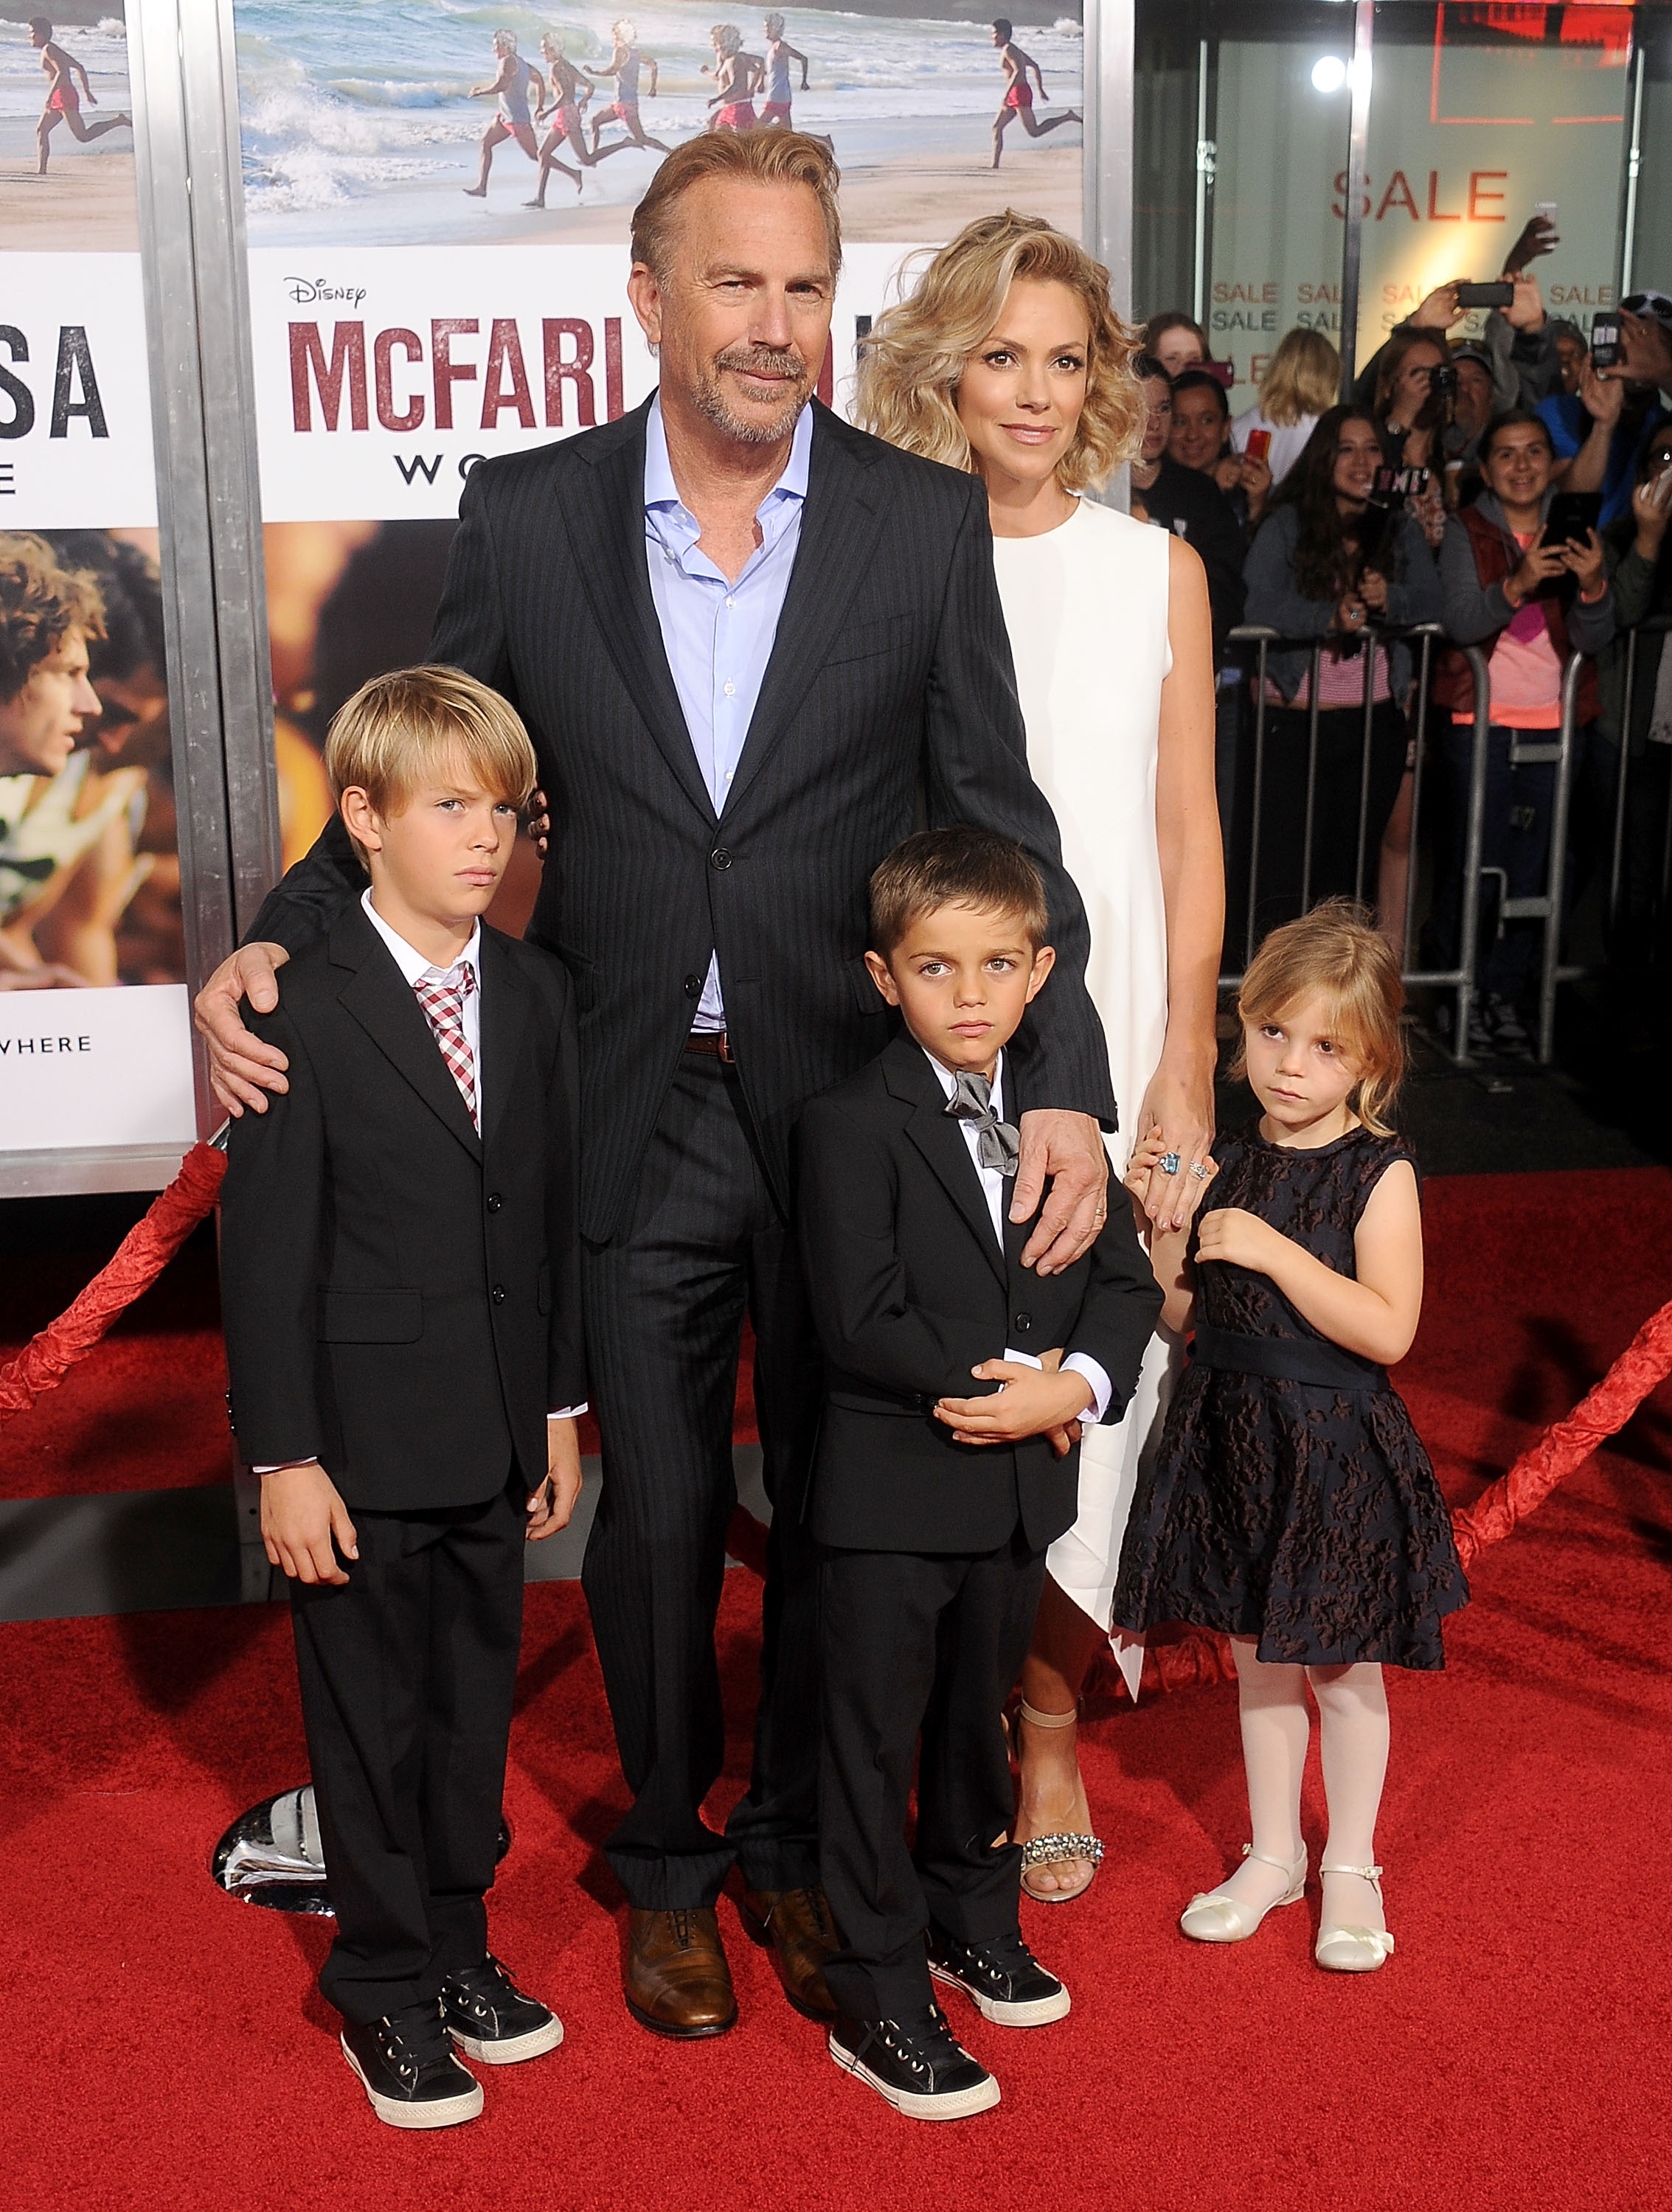 Kevin Costner, his wife, Christine, and children Grace Avery Costner, Hayes Logan Costner and Cayden Wyatt Costner arrive at the World Premiere of Disney's "McFarland, USA" at the El Capitan Theatre | Source: Getty Images